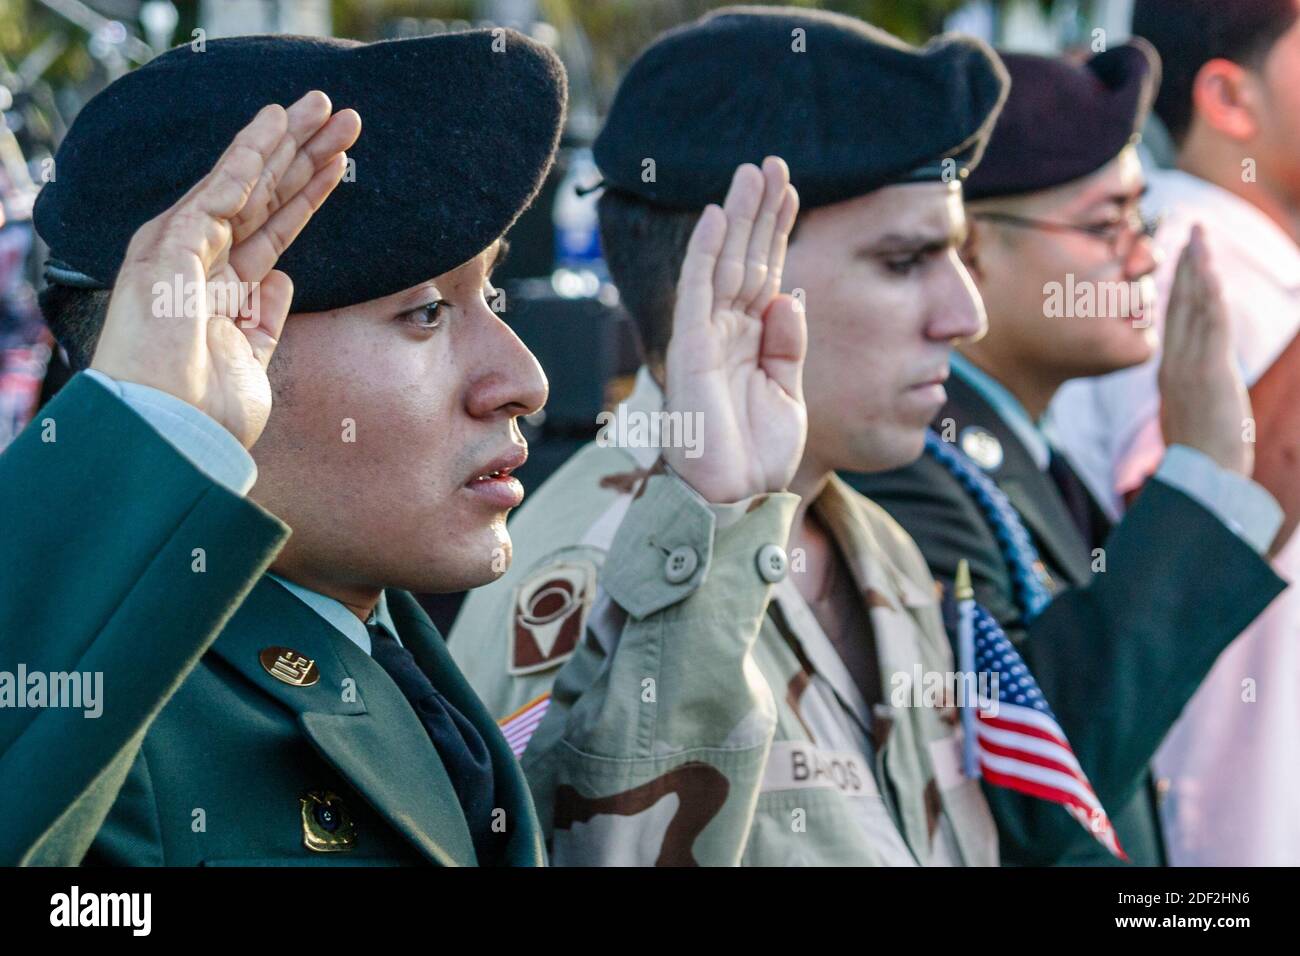 Miami Beach Florida,Ocean Drive,Lummus Park,4th of July Celebration citizenship ceremony naturalization swearing in,military personnel soldiers Asian Stock Photo